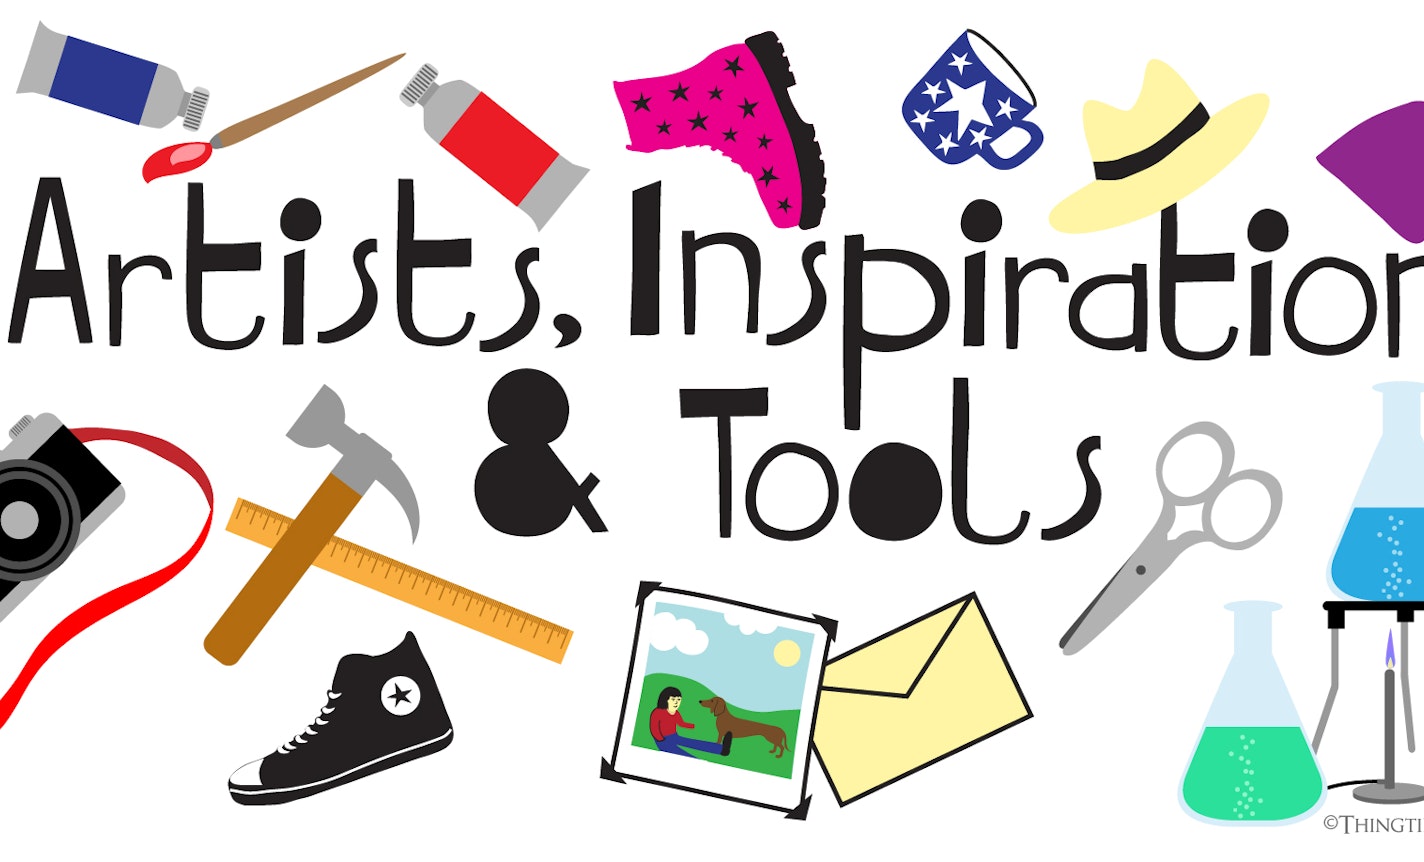 Show & Tale: Artists, Inspiration & Tools